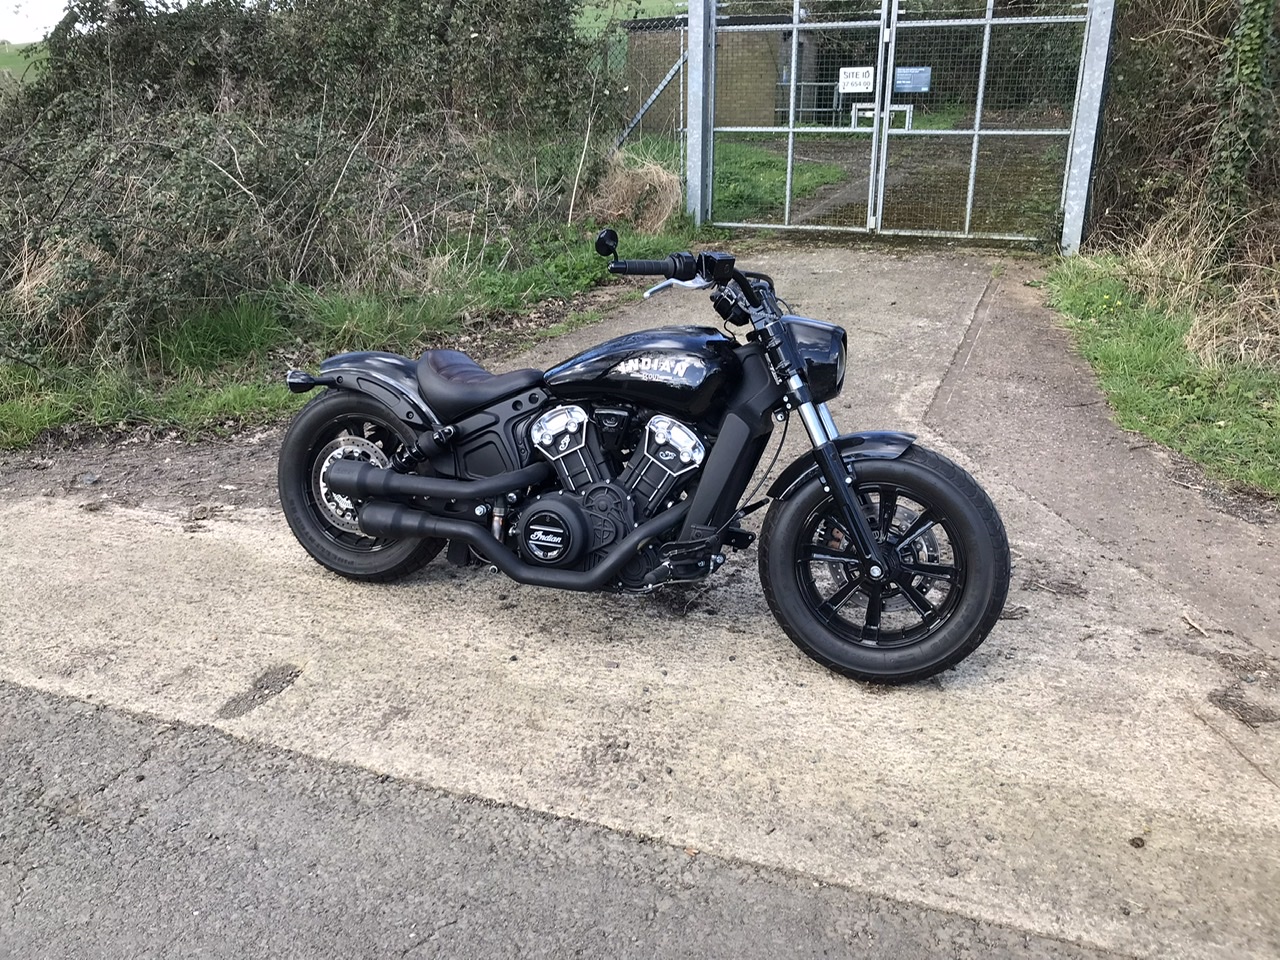 Pistonheads - The image features a black and chrome motorcycle parked on a concrete surface. The motorcycle has a prominent front fork design, with the engine clearly visible beneath the fuel tank. It is parked in an outdoor area, possibly near a road or pathway, as suggested by a fence and green foliage in the background. There is no text present in the image.